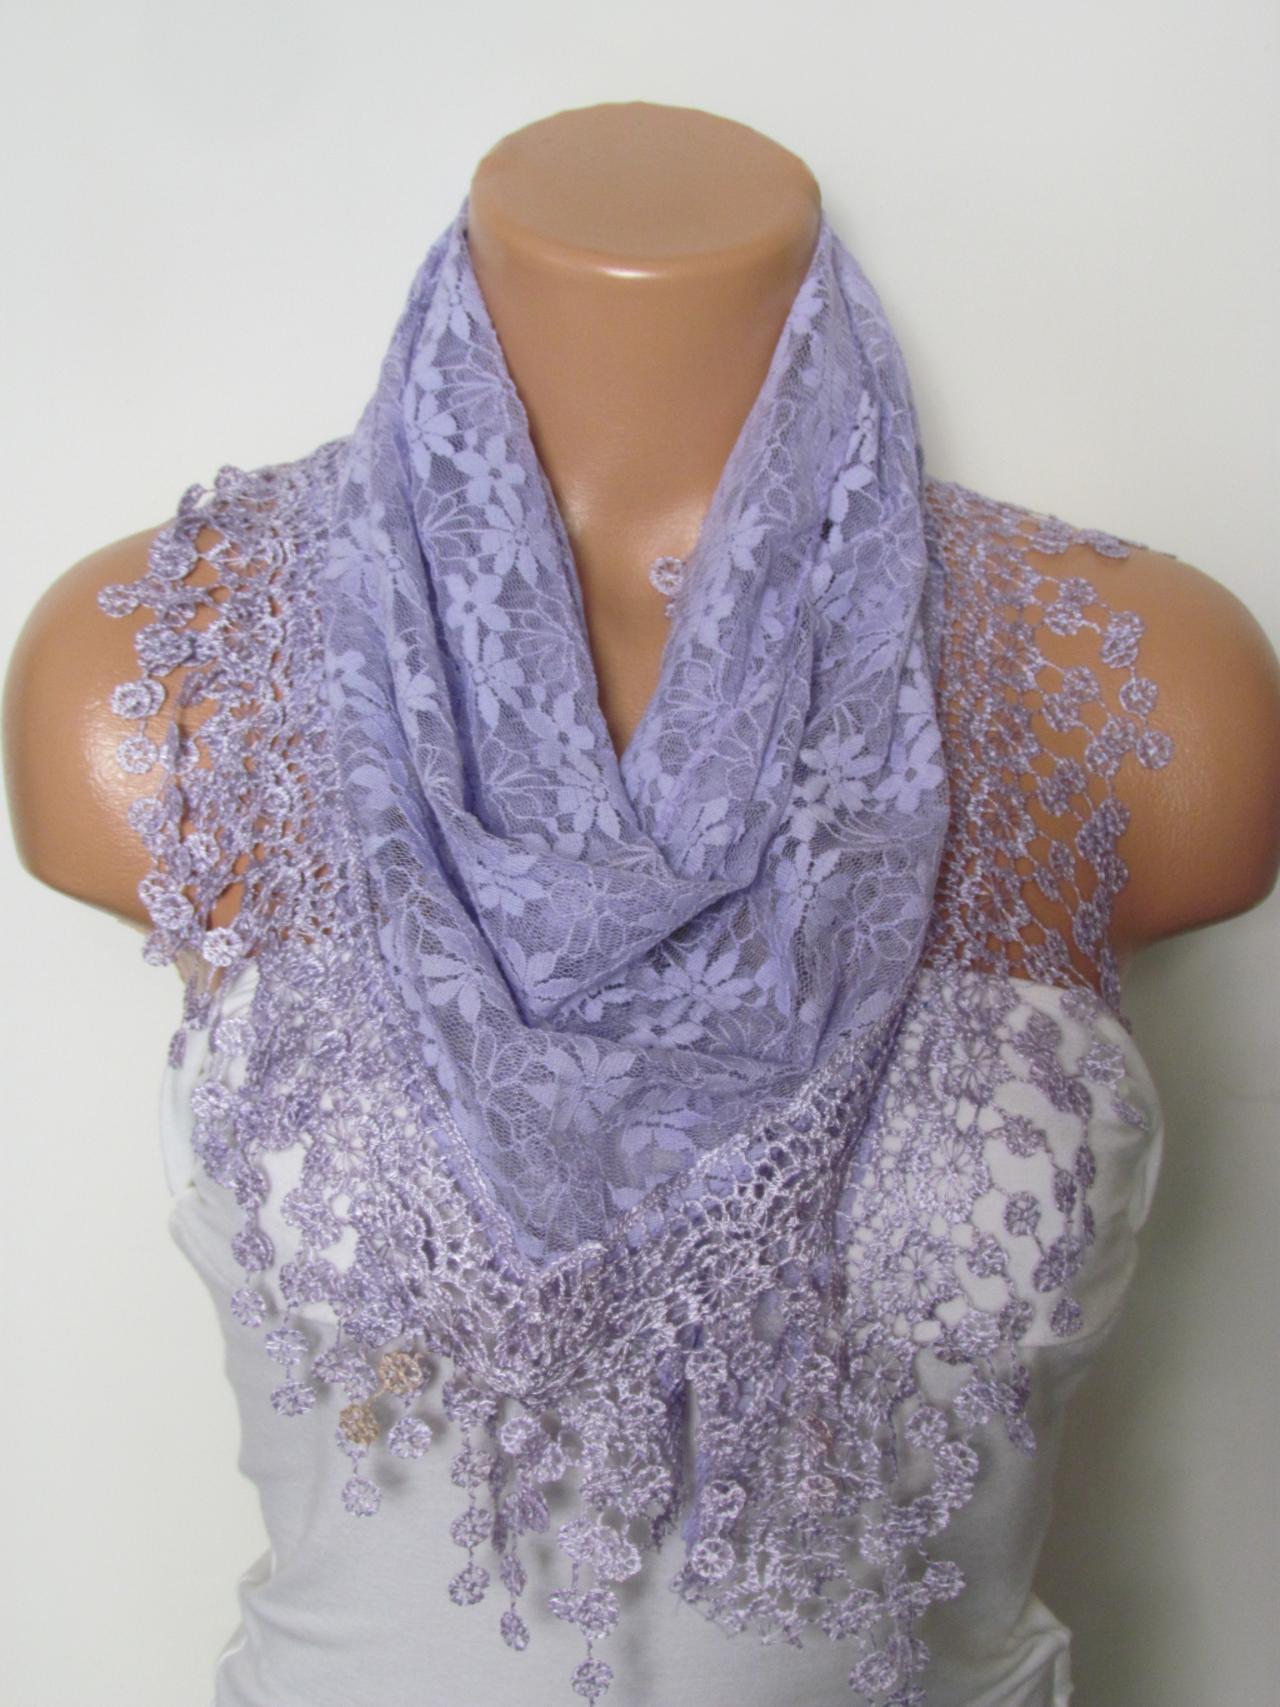 Lilac Long Scarf With Fringe-Winter Fashion Scarf-Headband-Necklace- Infinity Scarf- Winter Accessory-Long Scarf